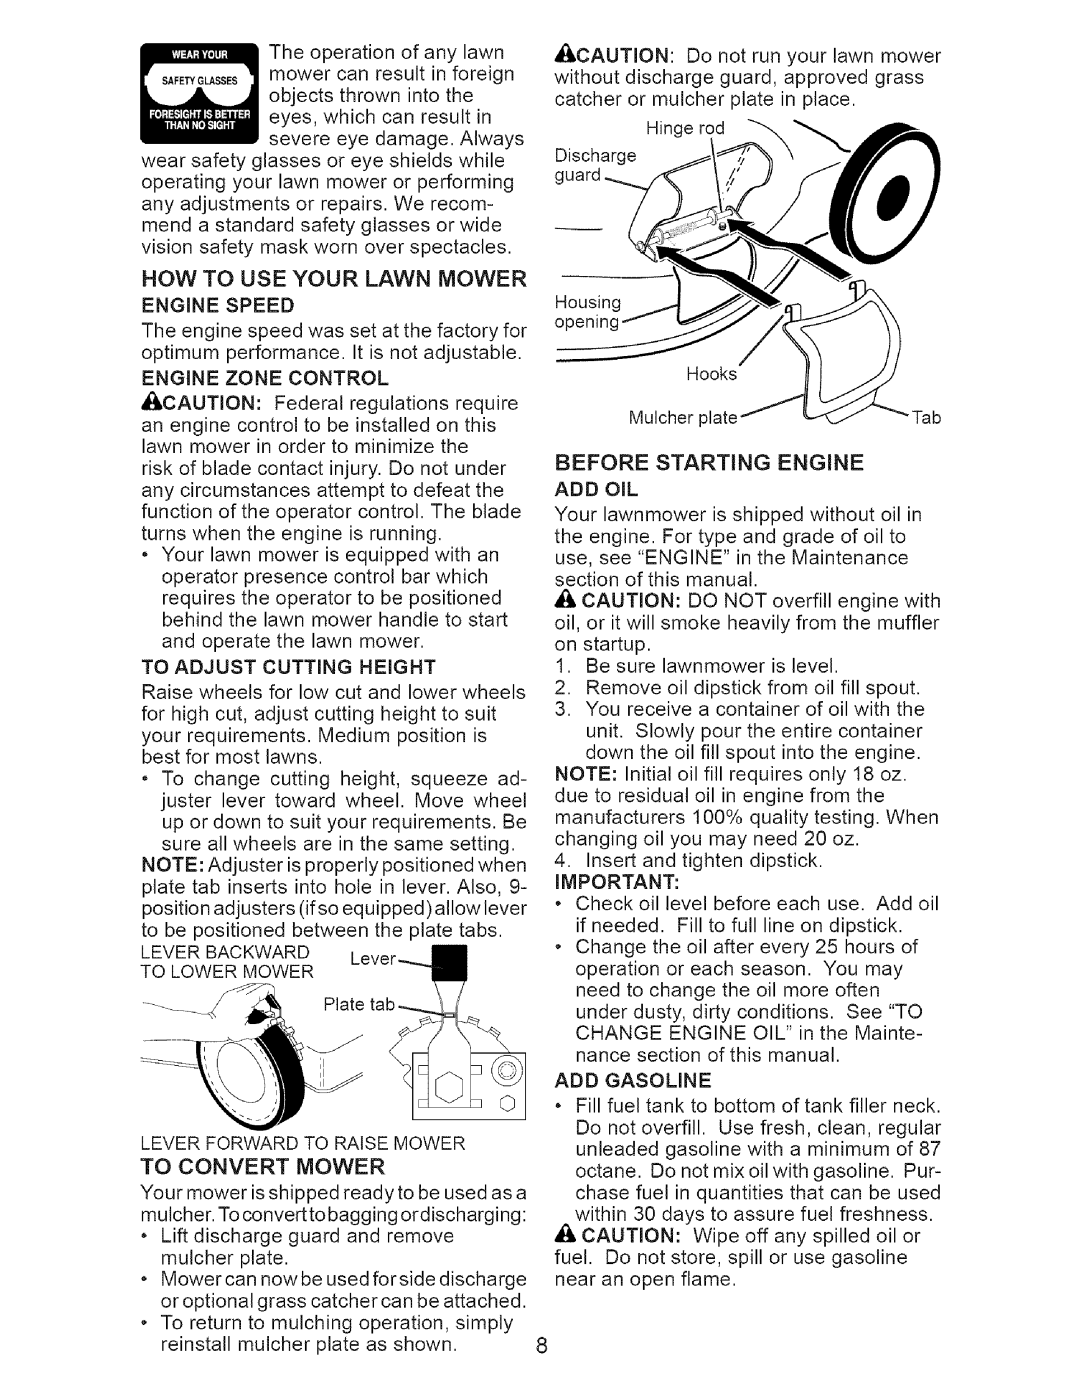 Craftsman 38514 owner manual How To Use Your Lawn Mower, To Convert Mower, Before Starting Engine, Add Gasoline 